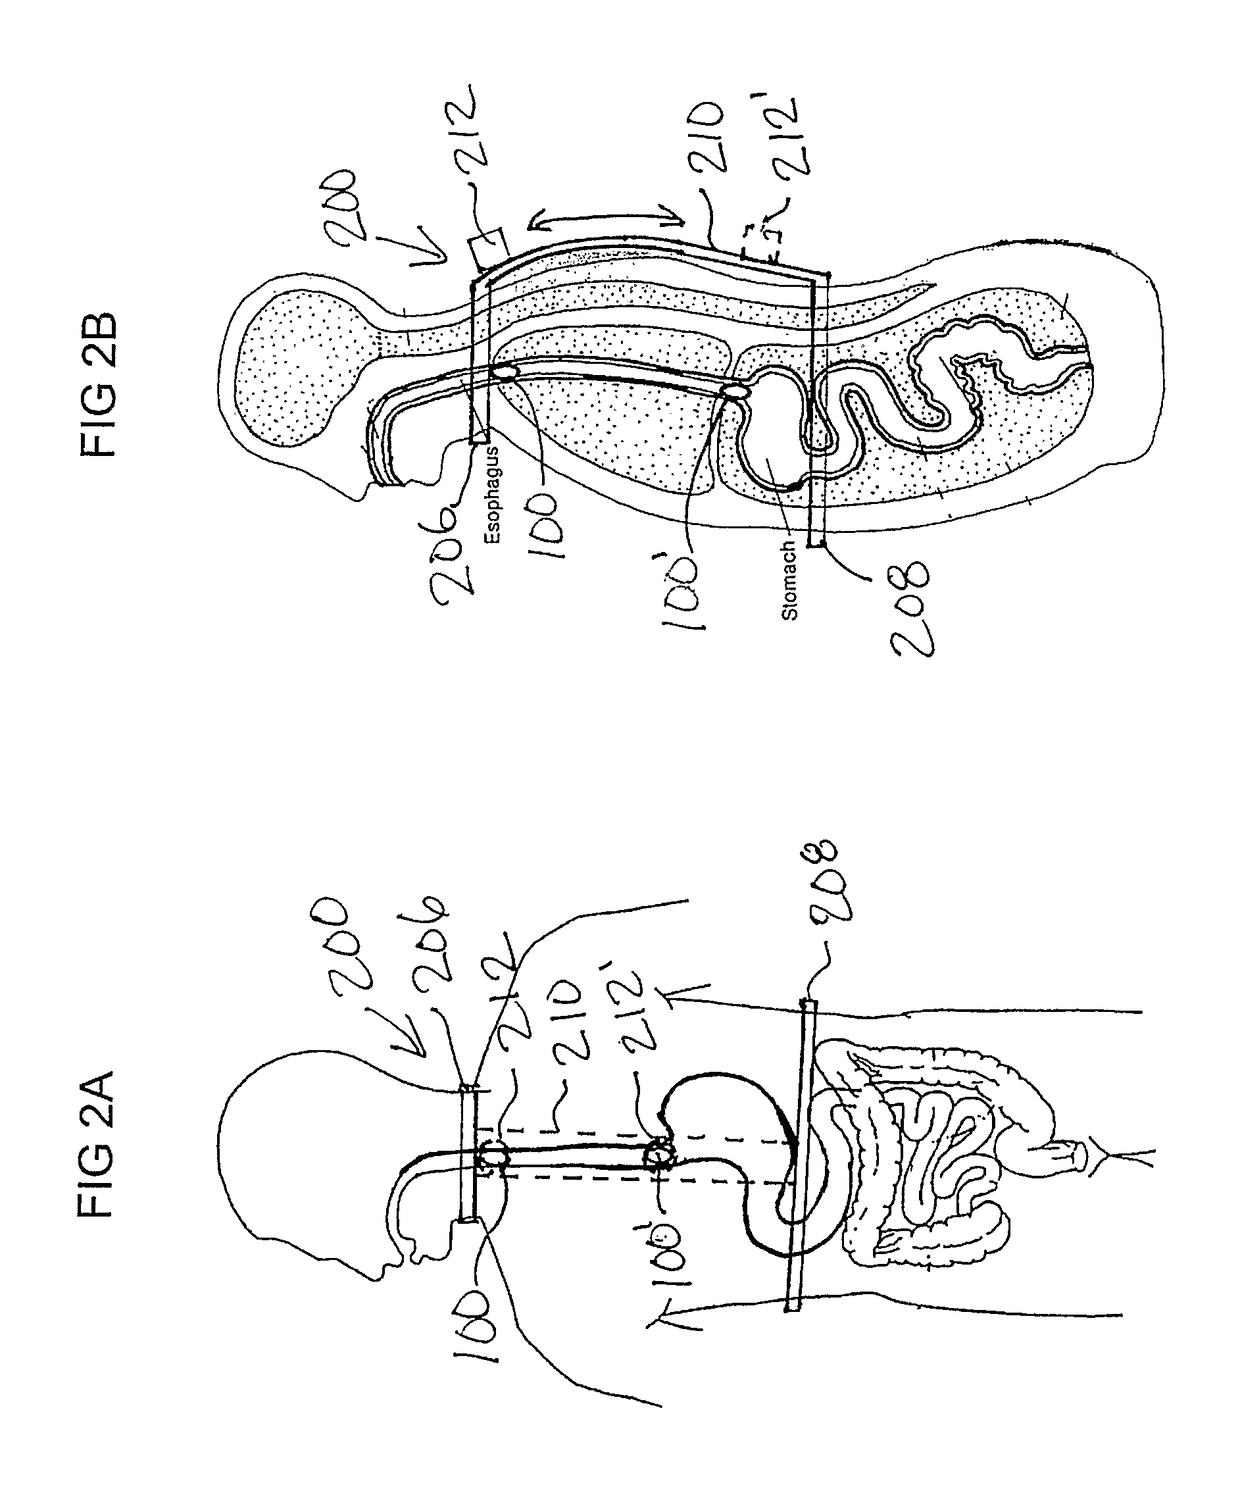 Apparatus and methods for capsule endoscopy of the esophagus